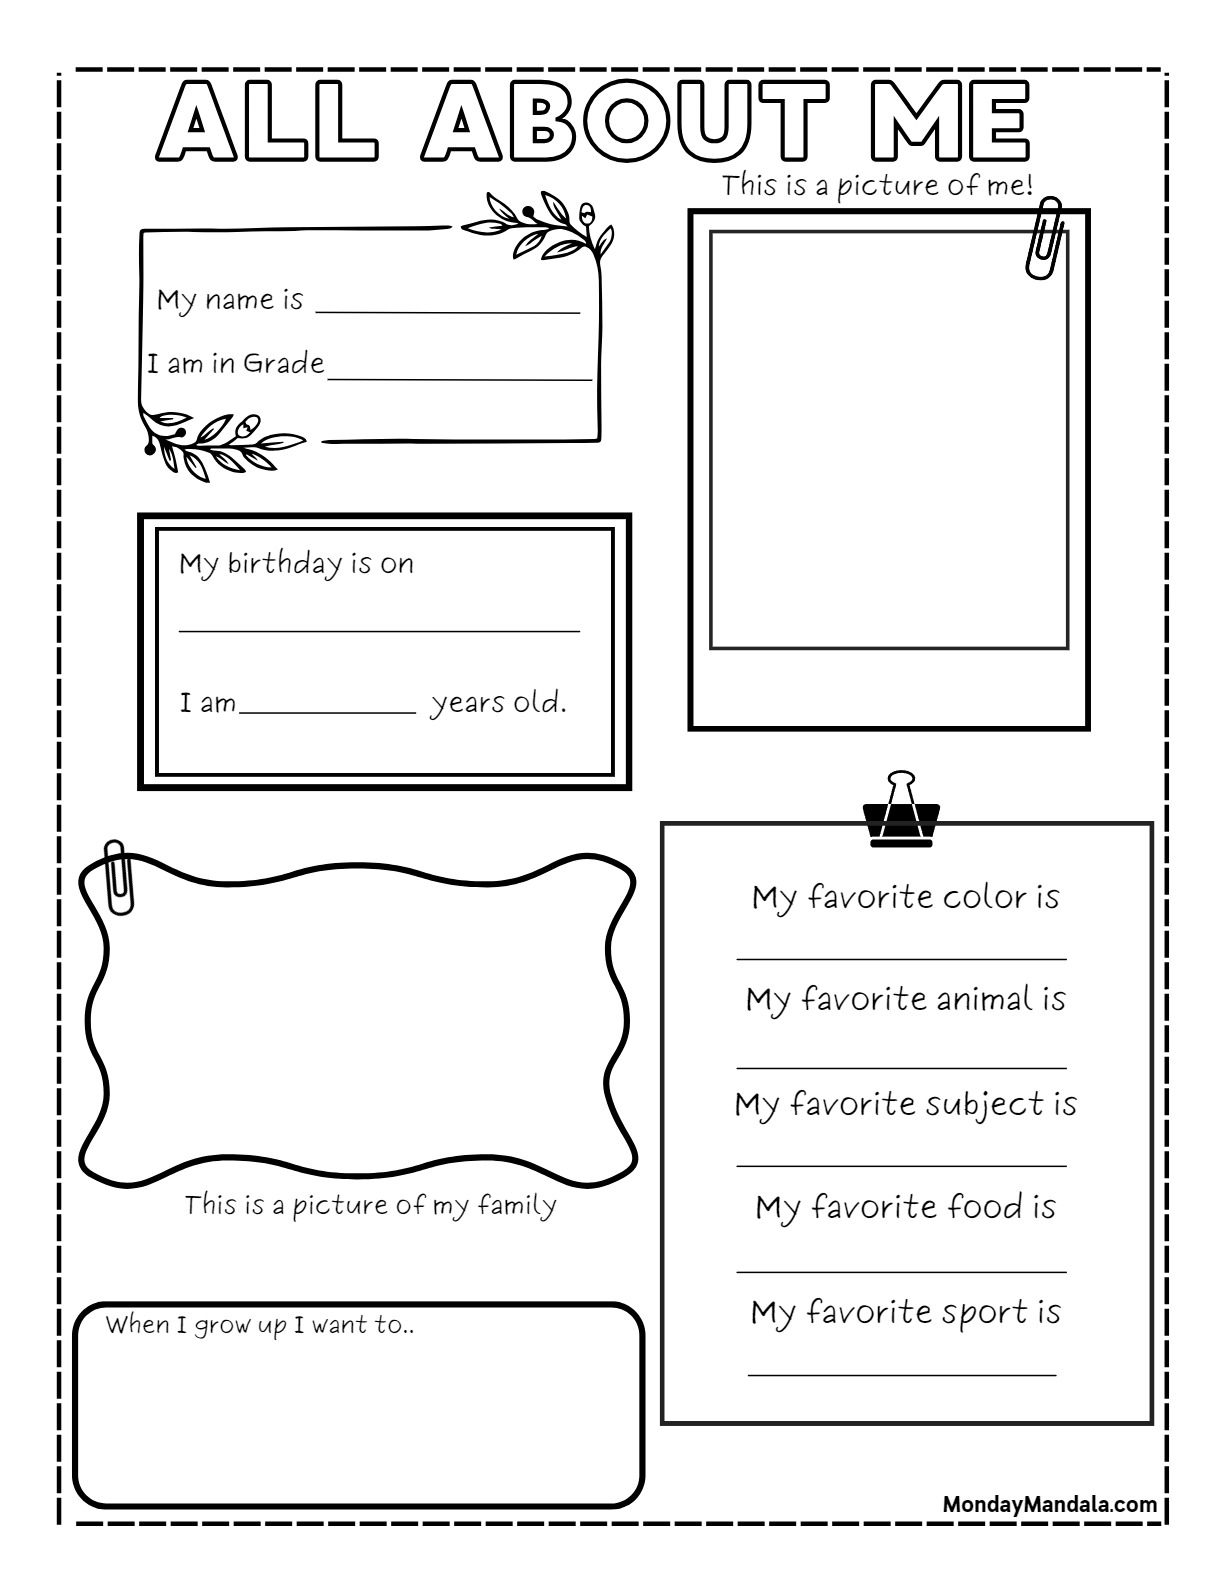 30 All About Me Worksheets Free PDF Printables 